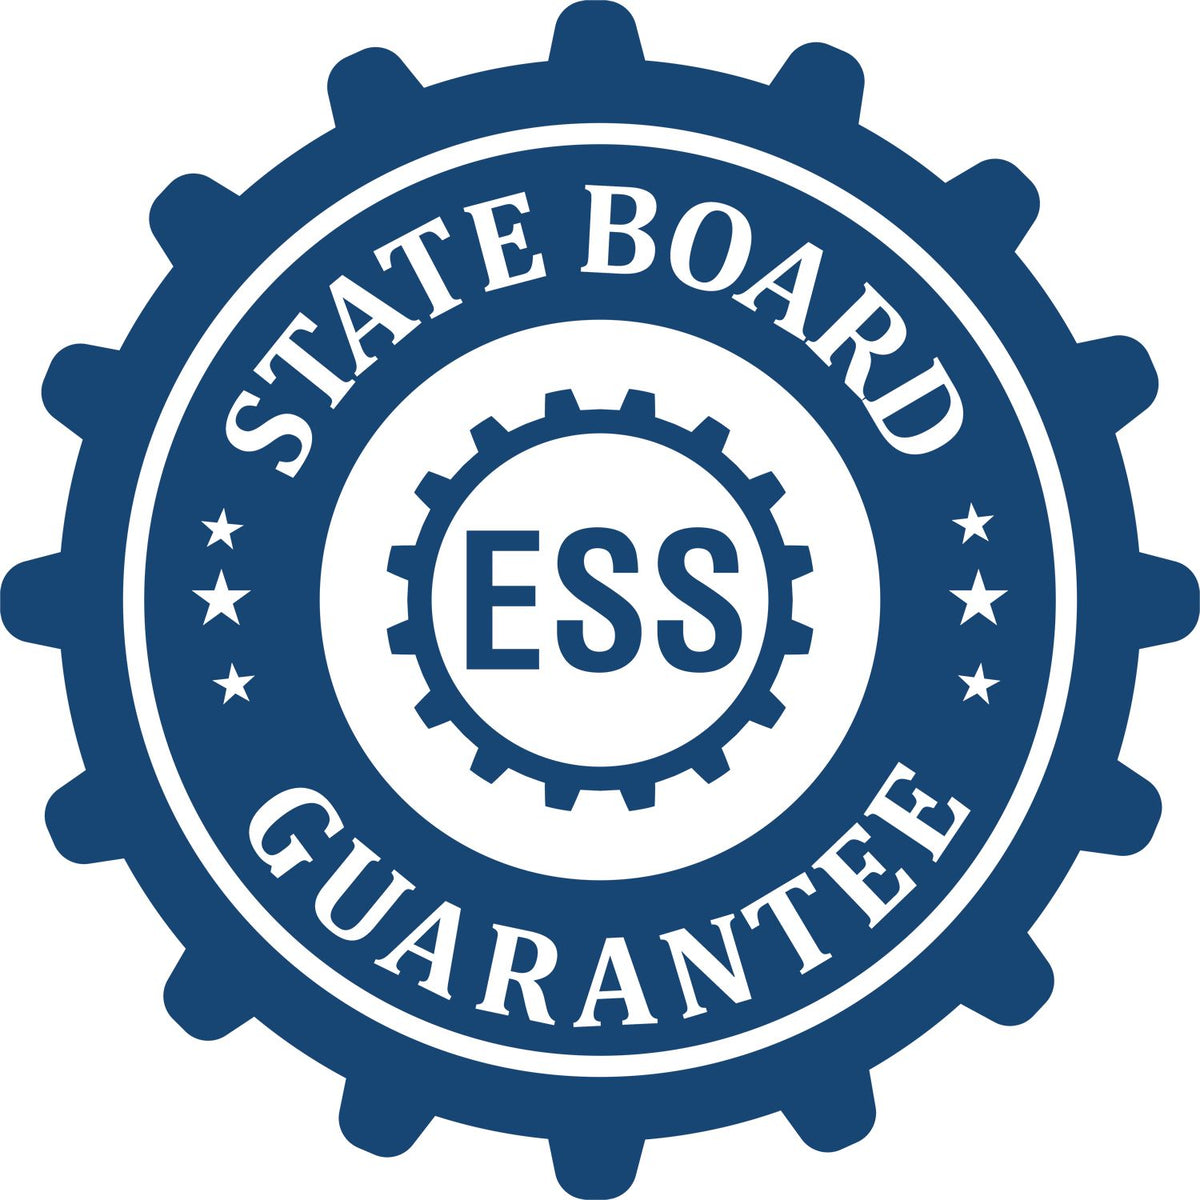 An emblem in a gear shape illustrating a state board guarantee for the Hybrid Vermont Engineer Seal